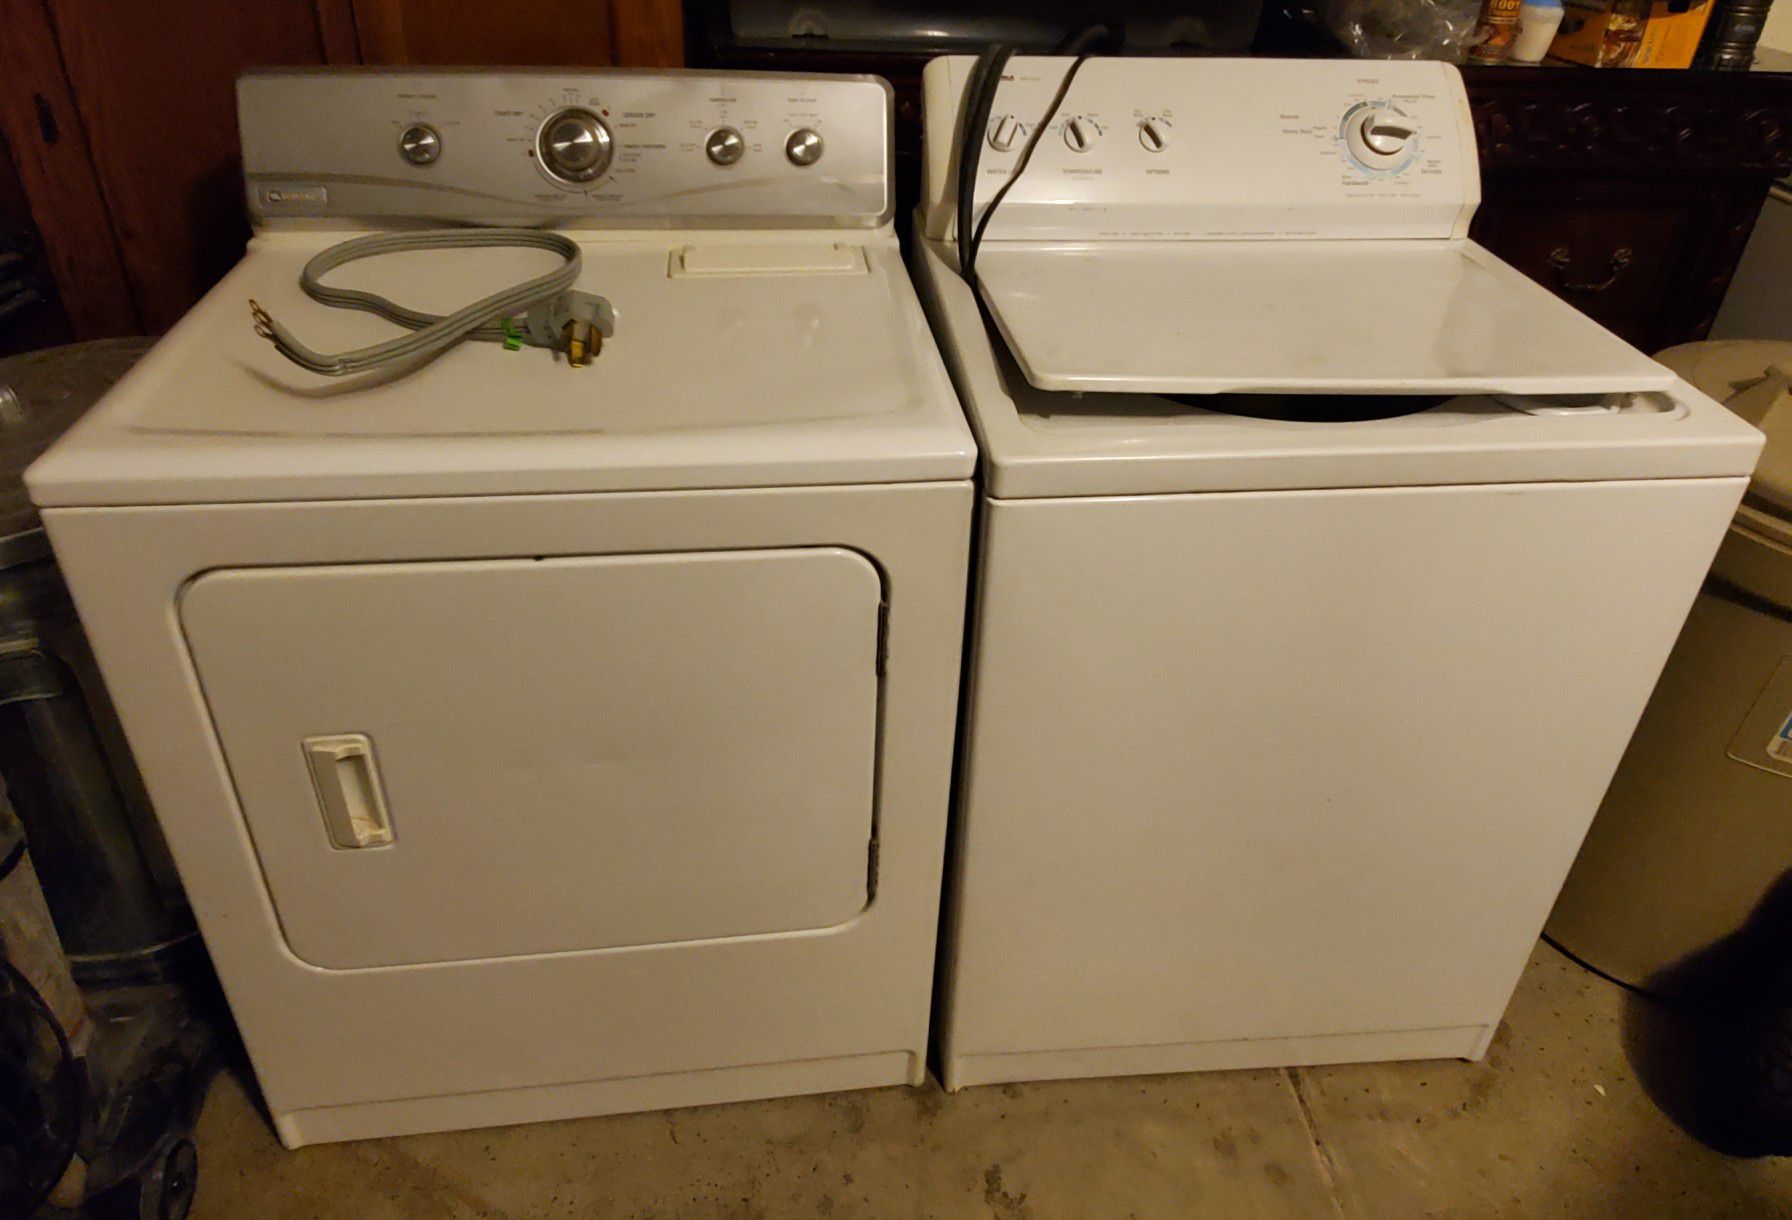 Kenmore Washer Maytag Dryer